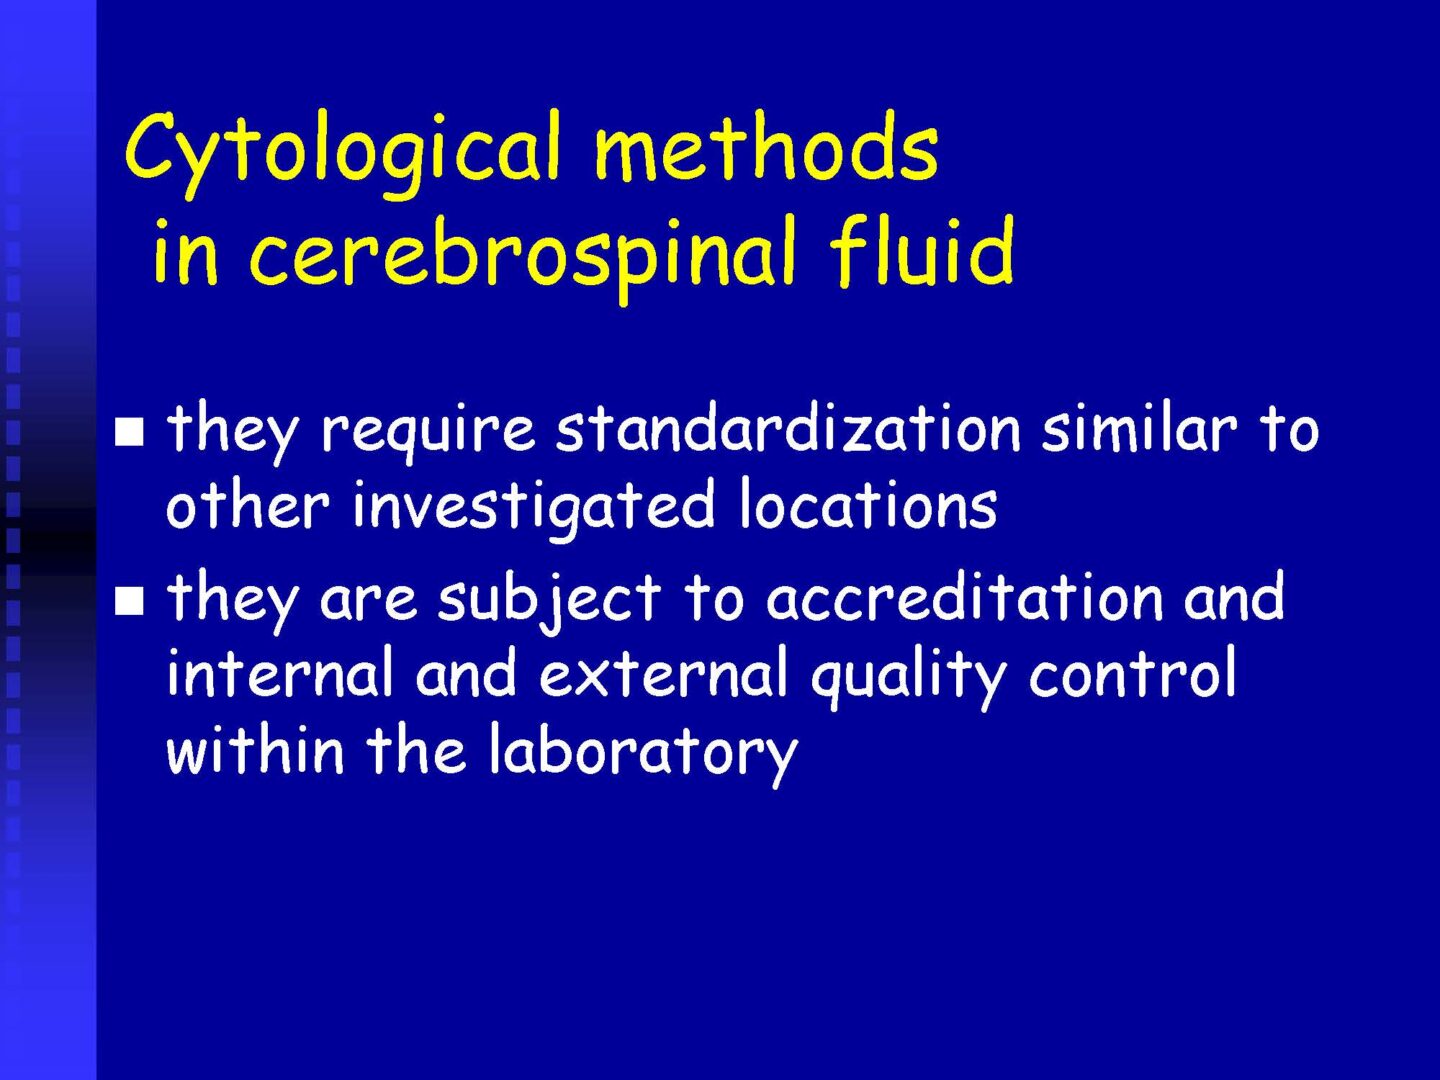 Cytology of the Cerebrospinal fluid - part II_Pagina_45